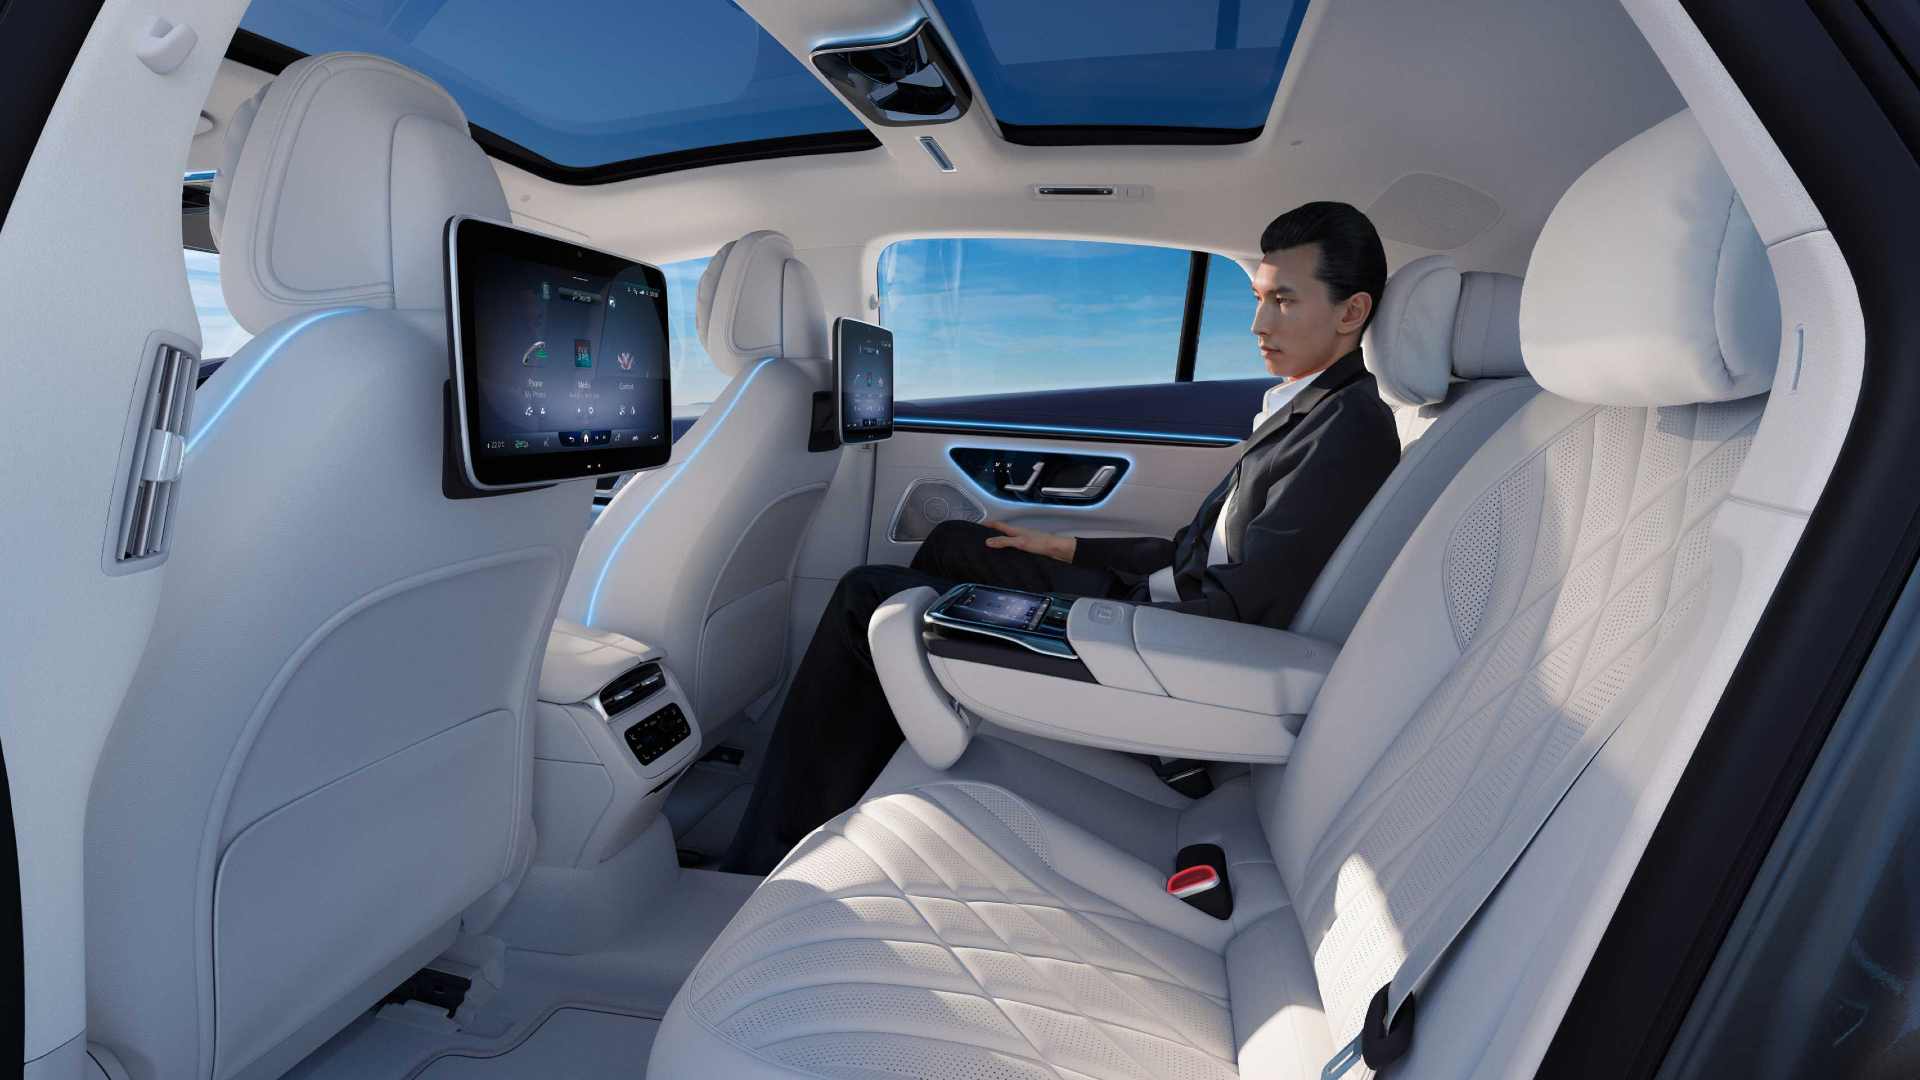 The Mercedes-Benz EQS is said to have even more rear seat space than the S-Class. Image: Mercedes-Benz